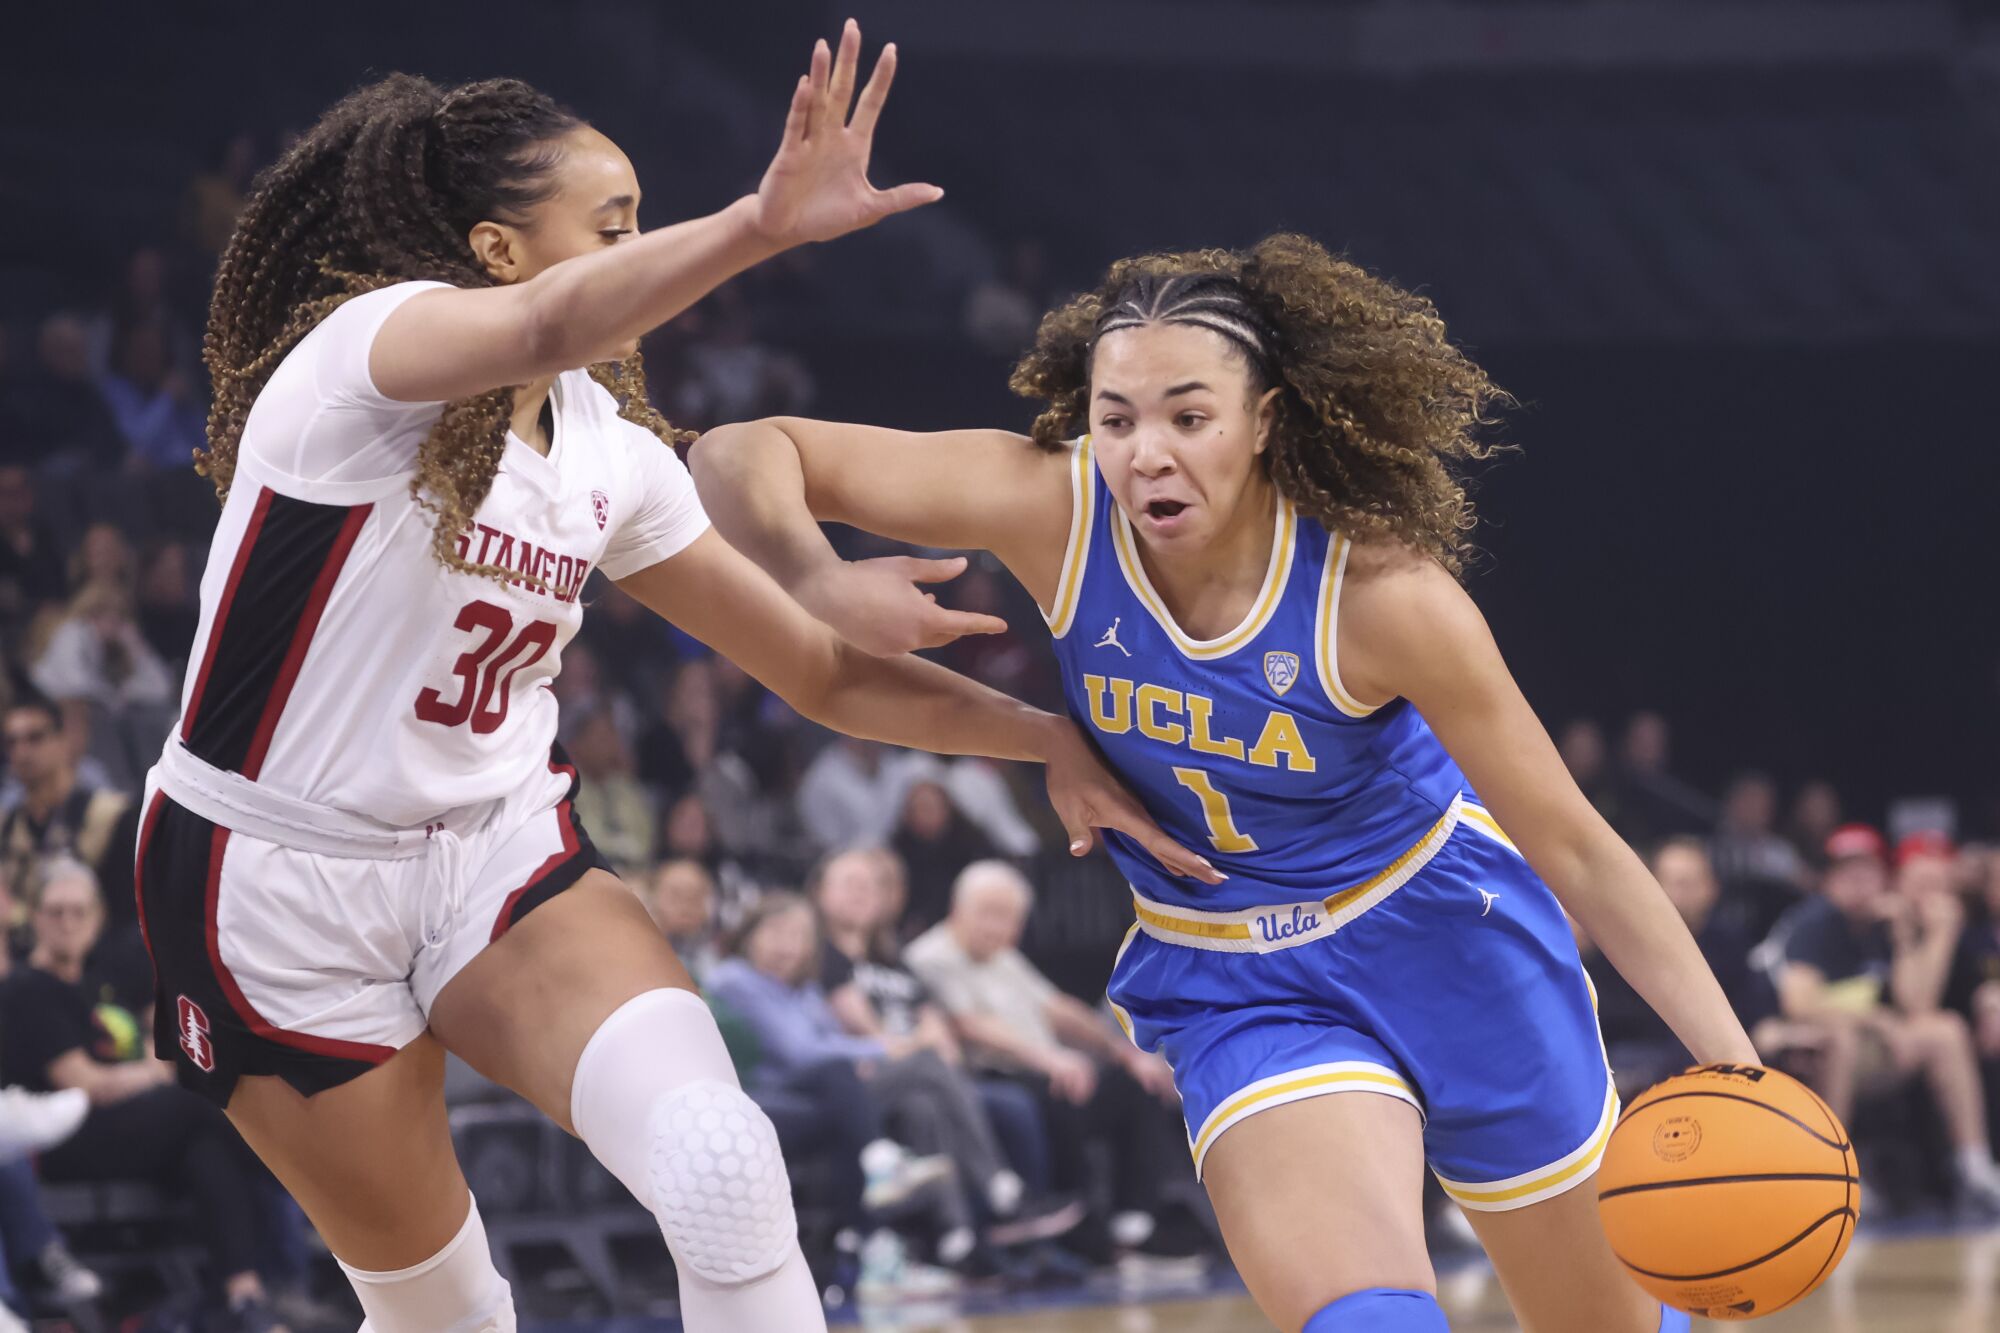 UCLA guard Kiki Rice, right, drives to the basket under pressure from Stanford guard Haley Jones.